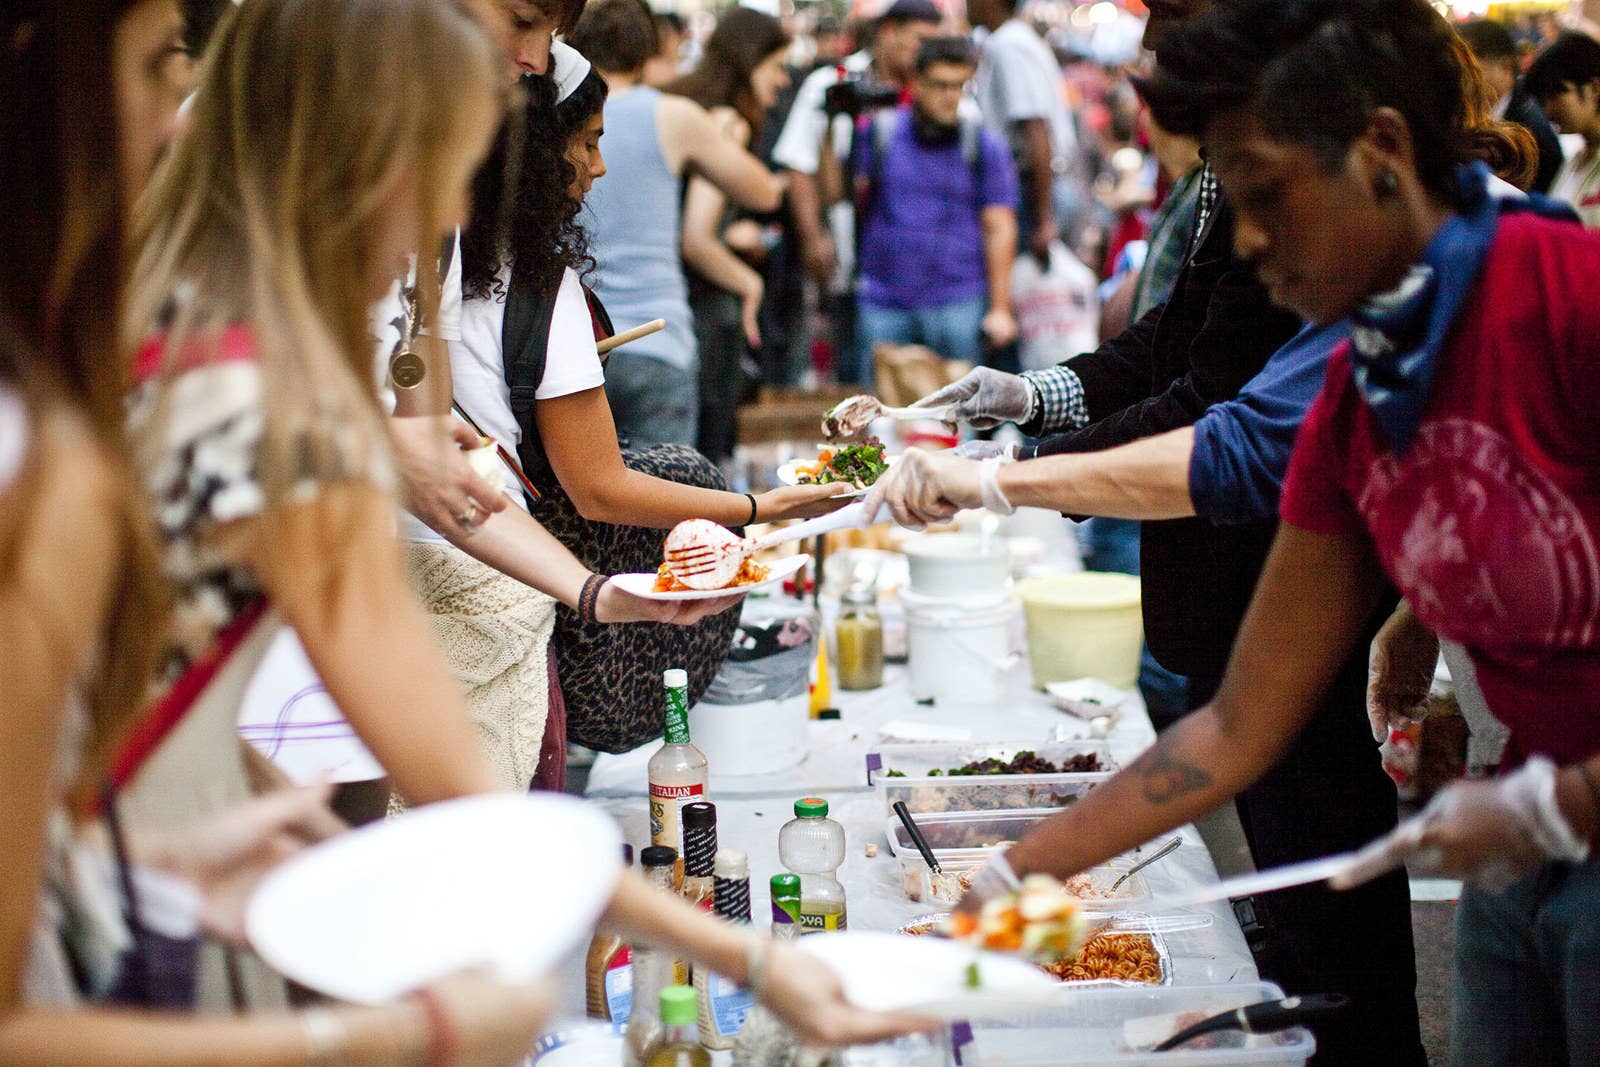 Volunteers serve food to protesters at Zuccotti Park on Oct. 8, 2011.